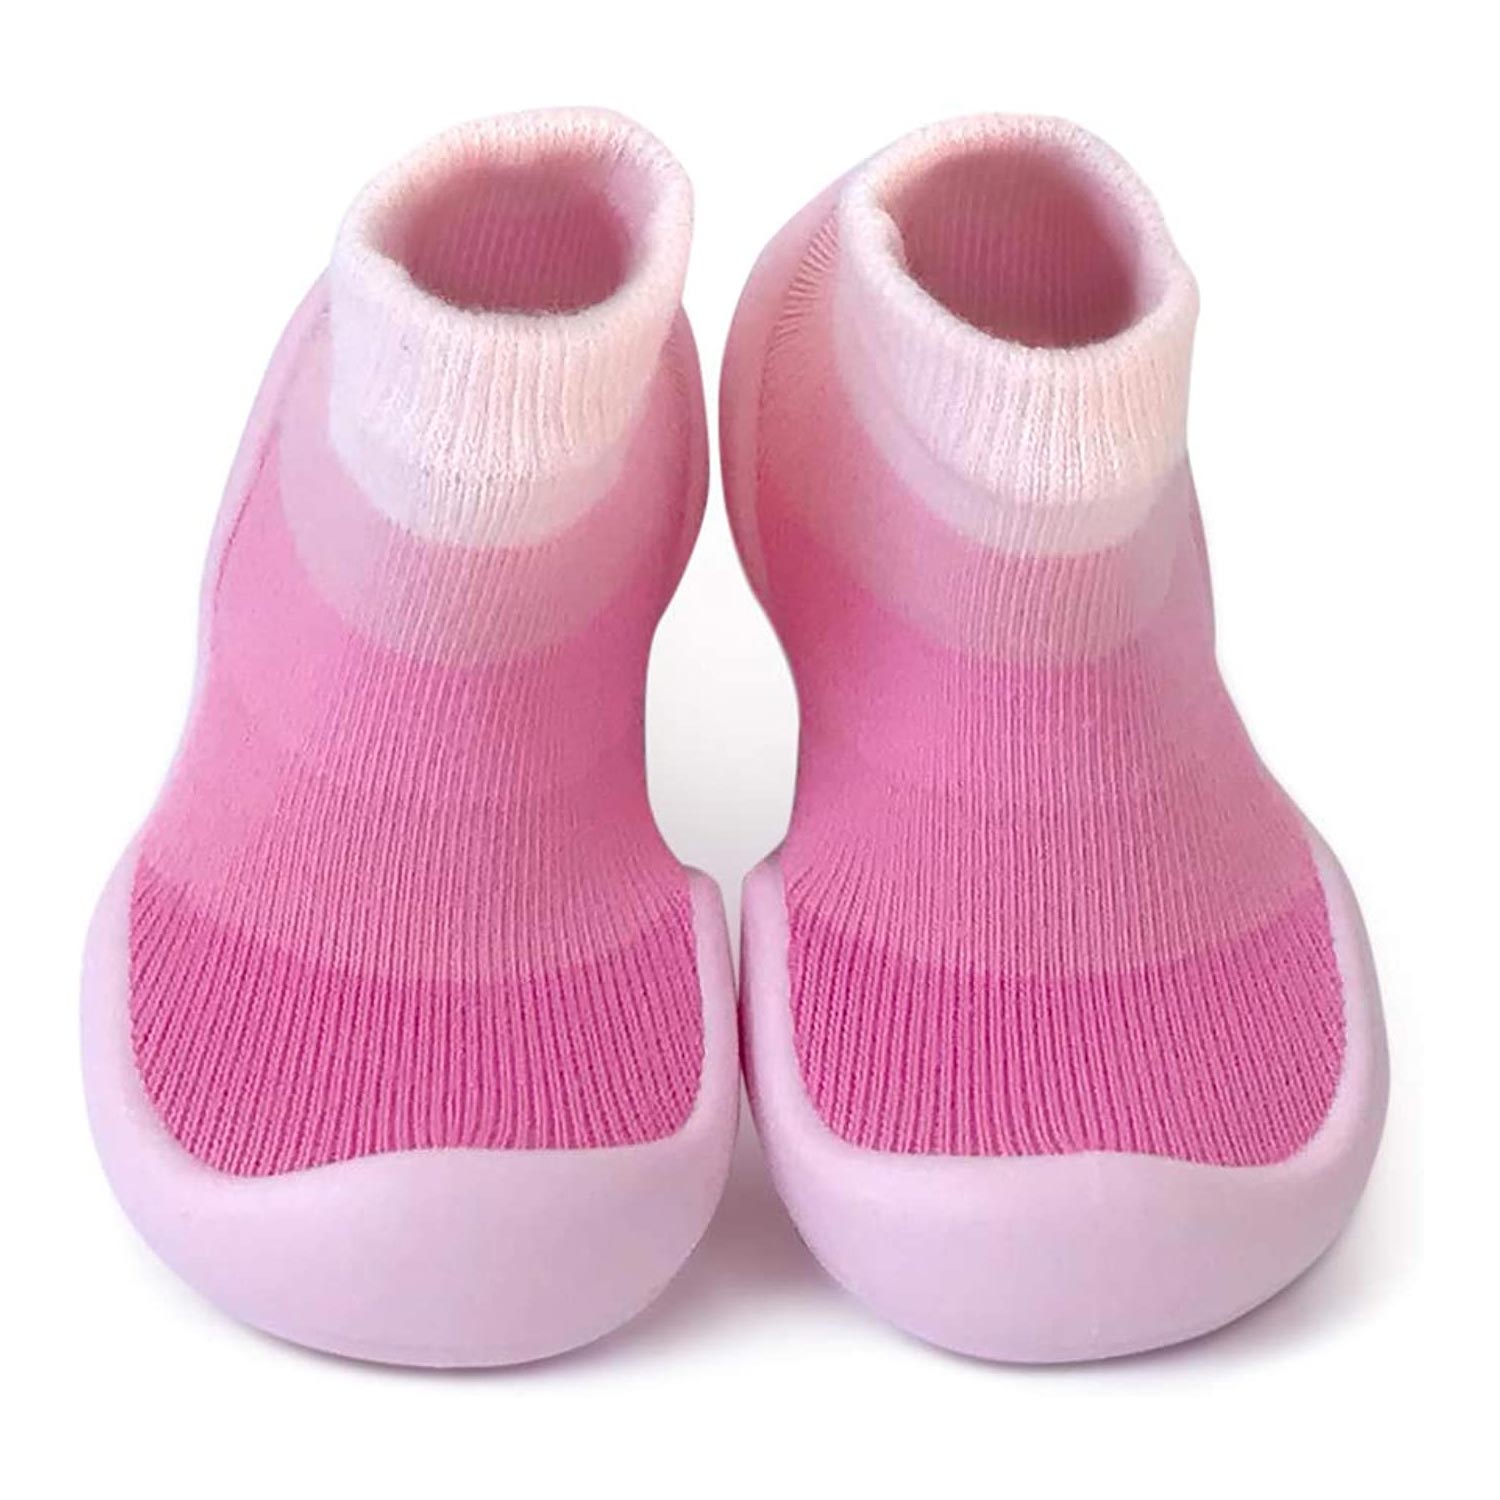 Step Ons Rubber Sole Sock Baby Shoes: for Crawling Cruising and Walking!